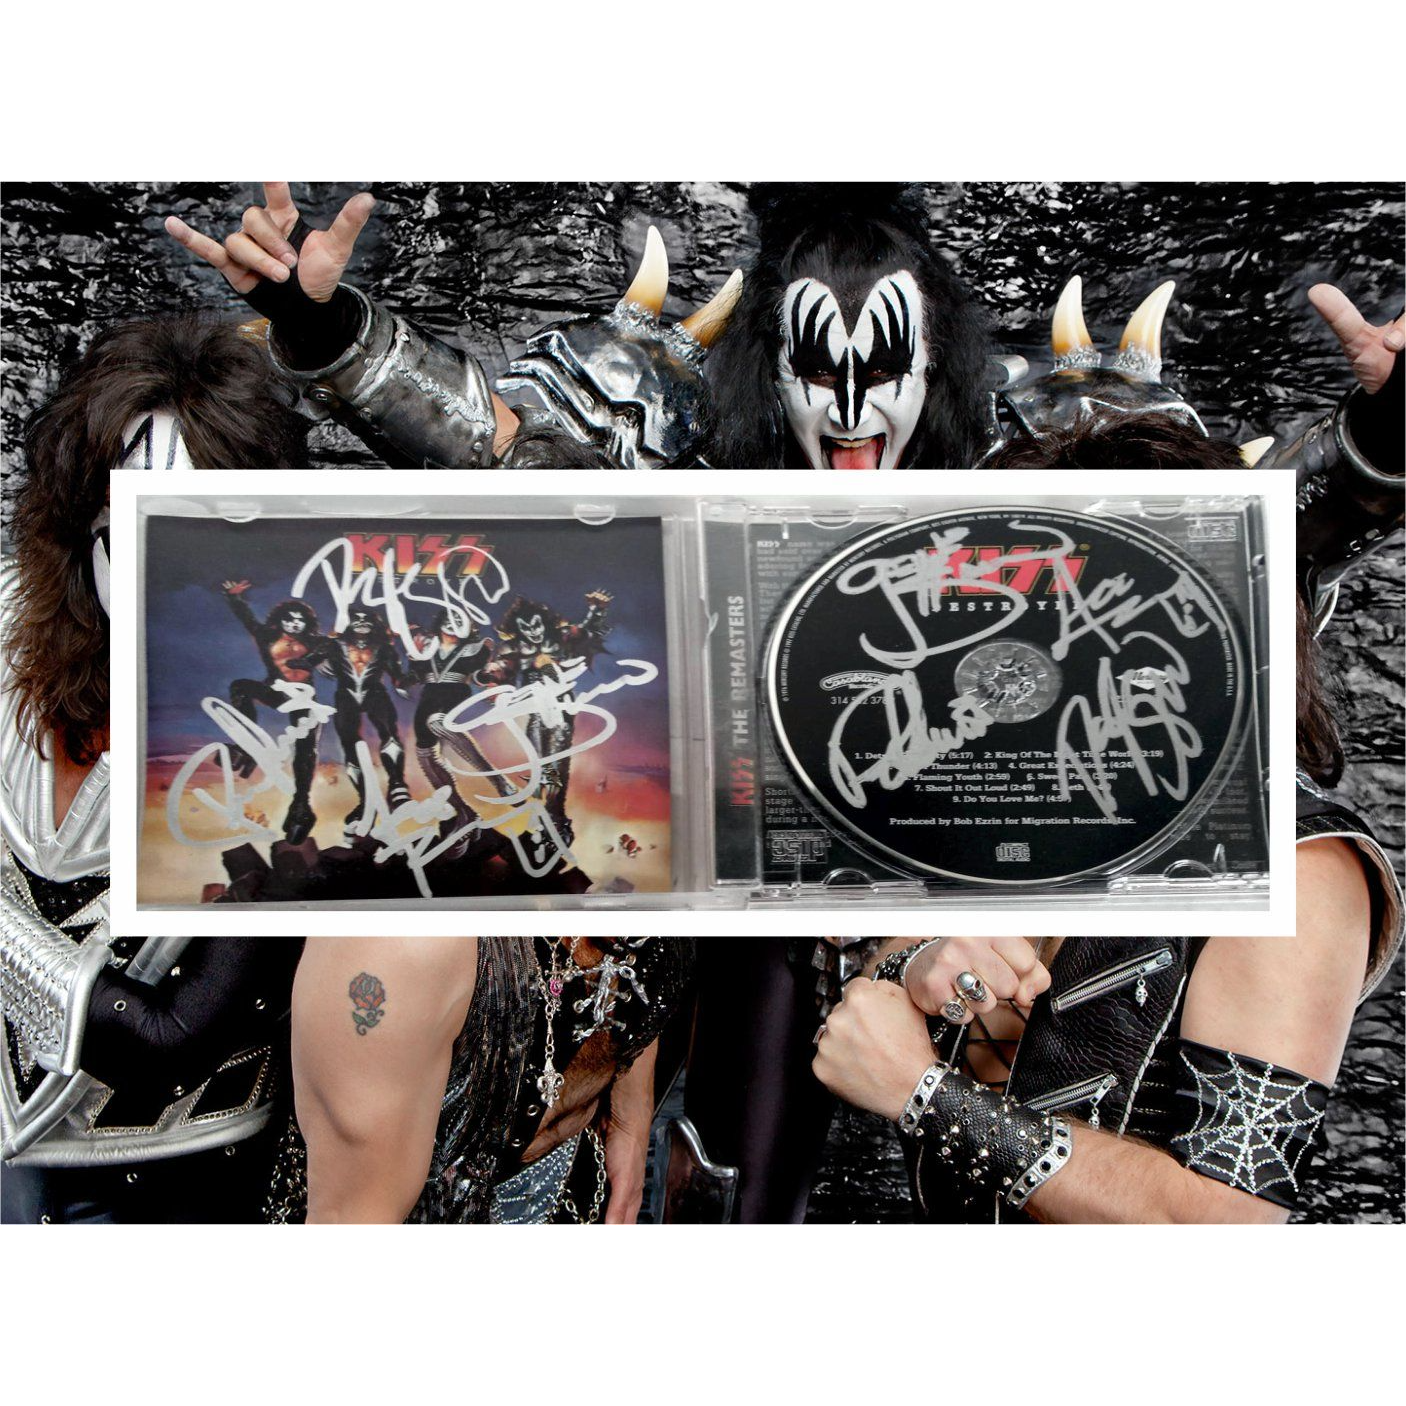 Gene Simmons Ace freely Peter Chris Paul Stanley kiss dual signed CD with proof